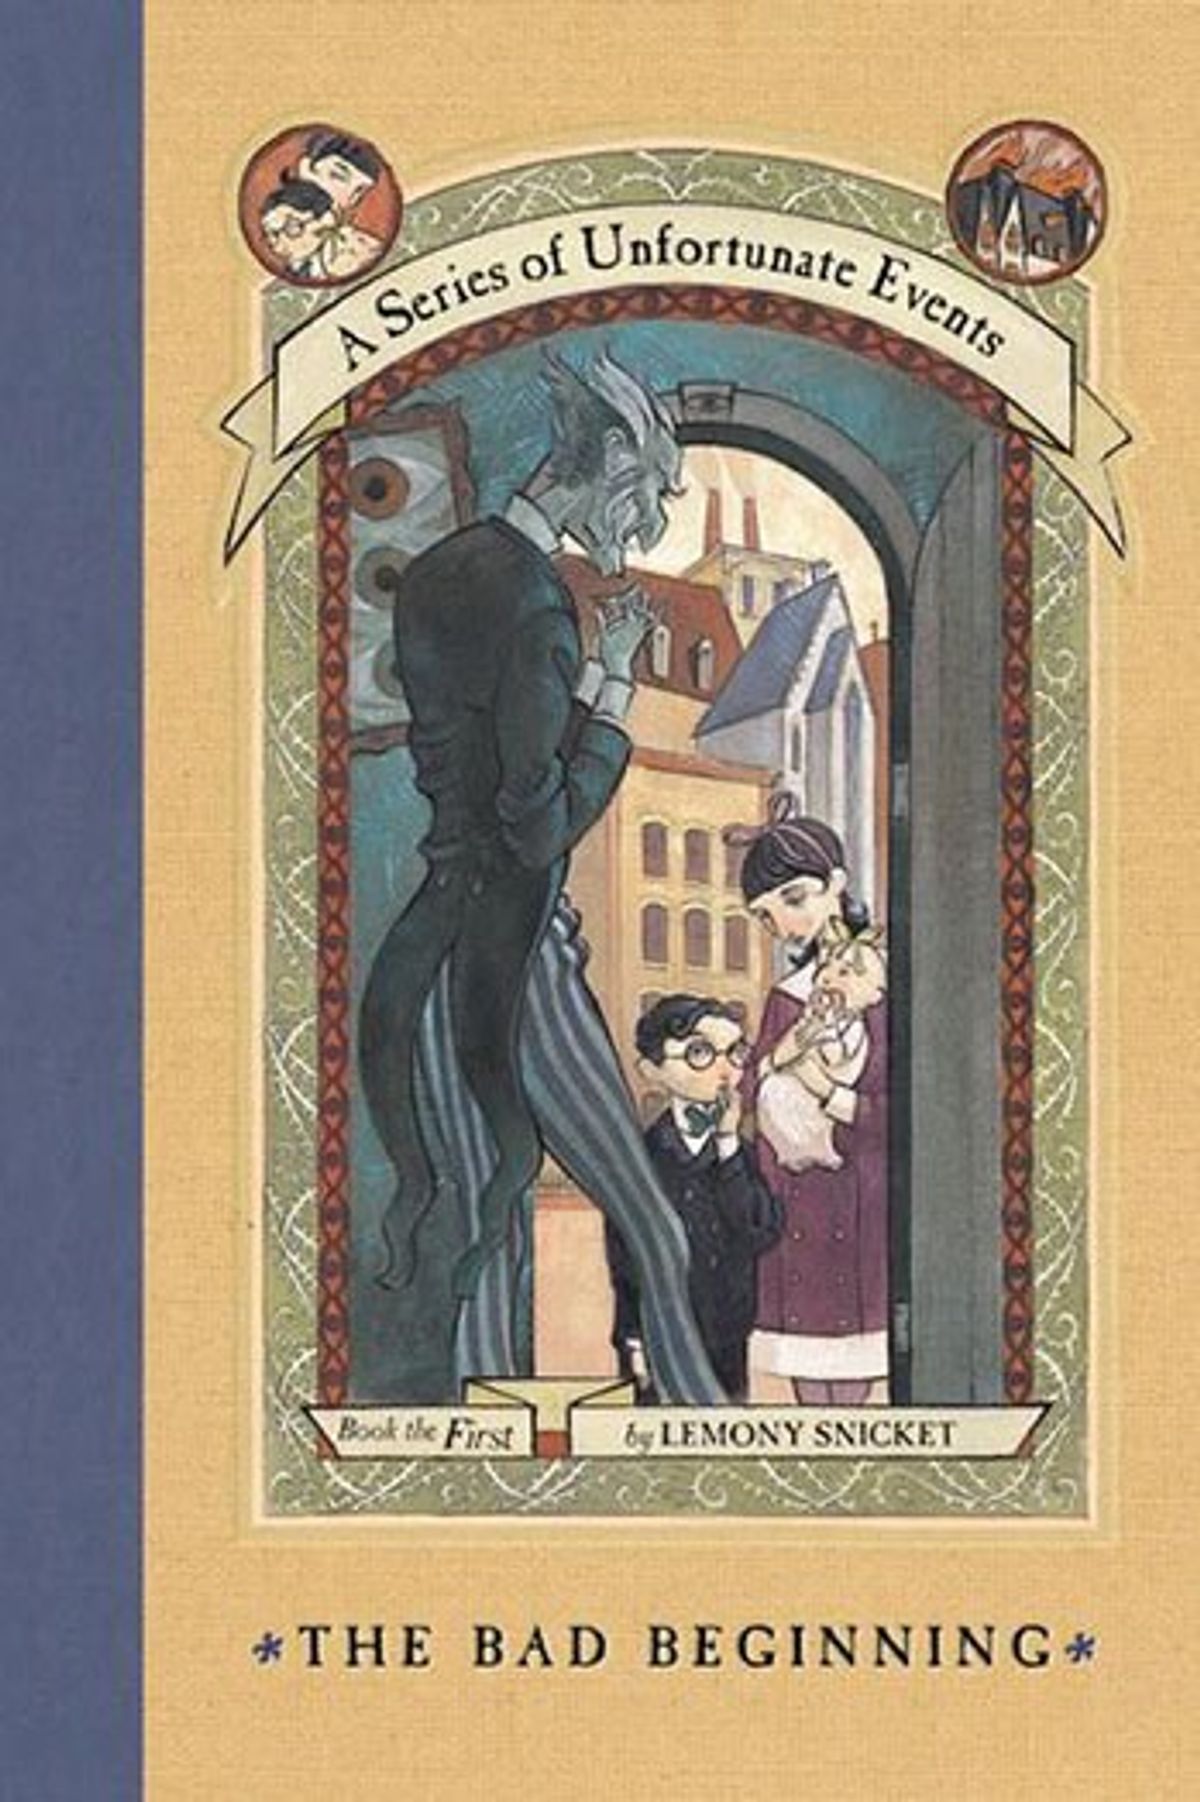 What Ever Happened to... Lemony Snicket